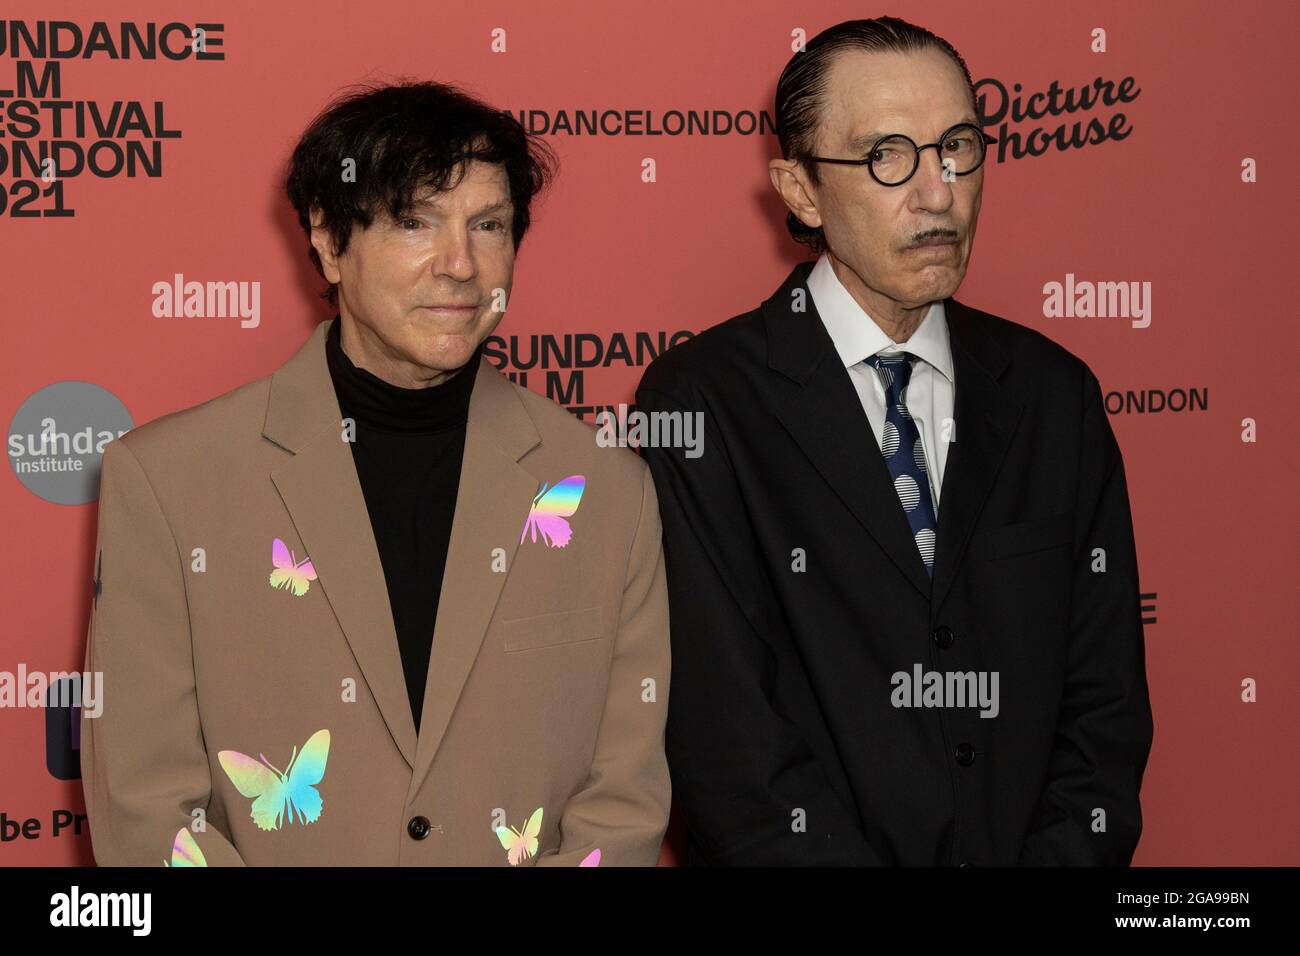 London, UK. 29th July, 2021. London, UK. Russel Mael and Ron Mael attend The Sparks Brothers Premiere at Sundance Festival 2021 at Picture house Central. 7th May 2021 Credit: Martin Evans/Alamy Live News Stock Photo